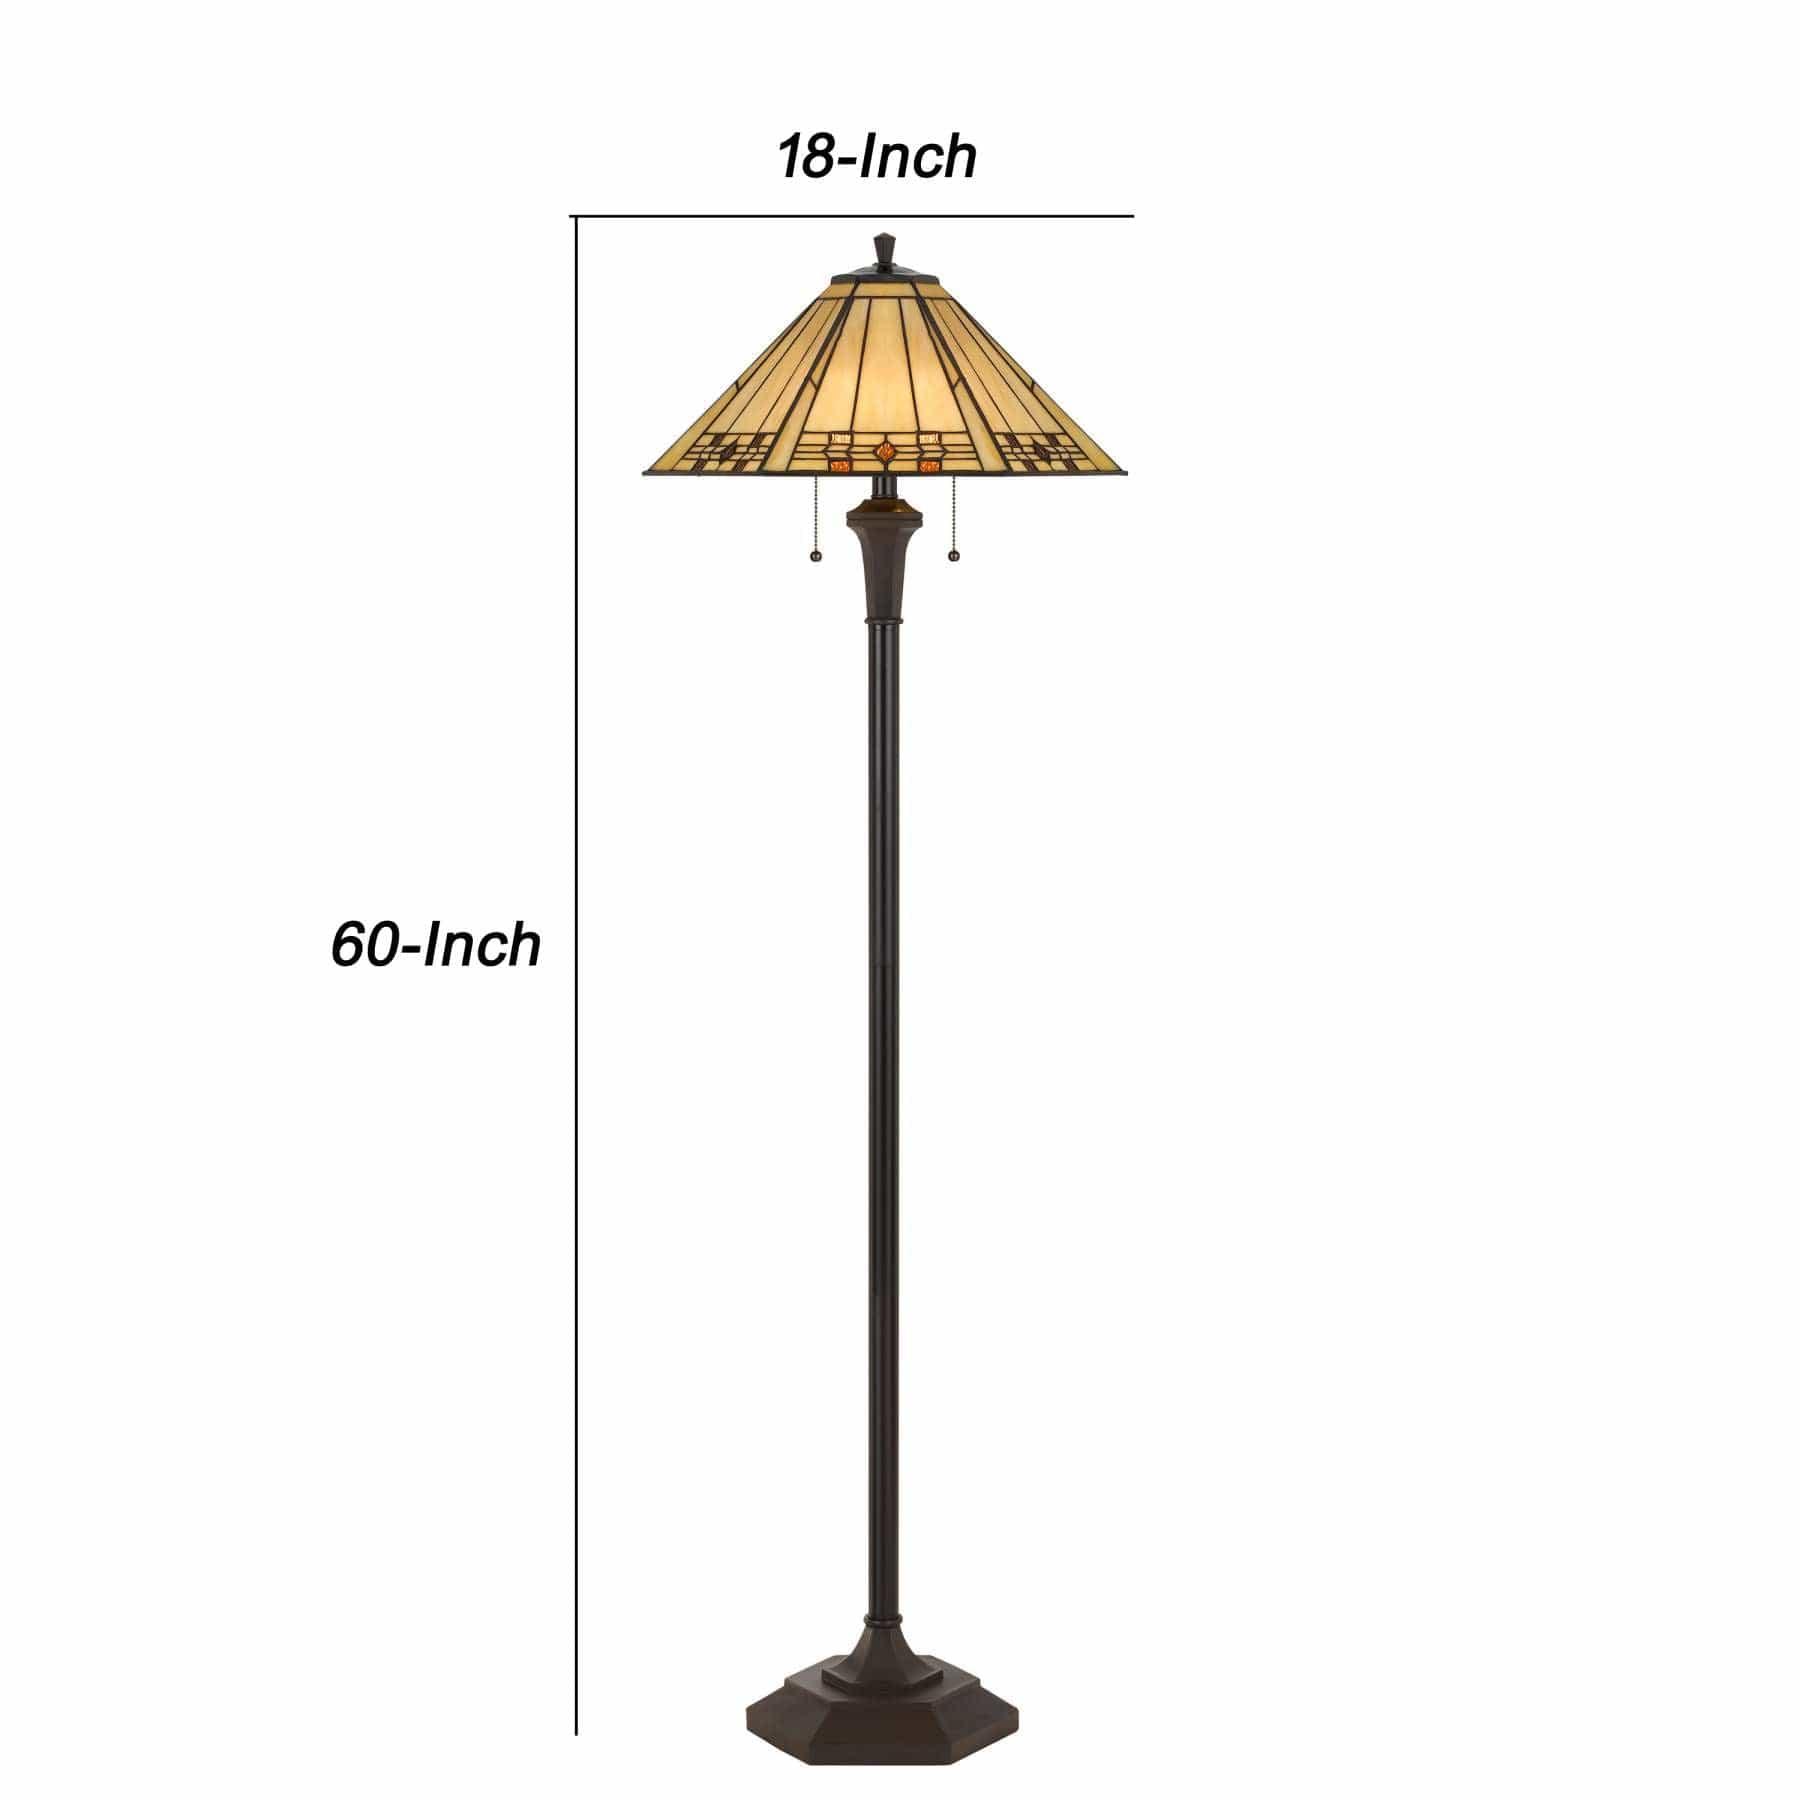 Benzara Polyresin Floor Lamp With Glass Shade And Pull Chain Switch, Black By Benzara Floor Lamps BM224844